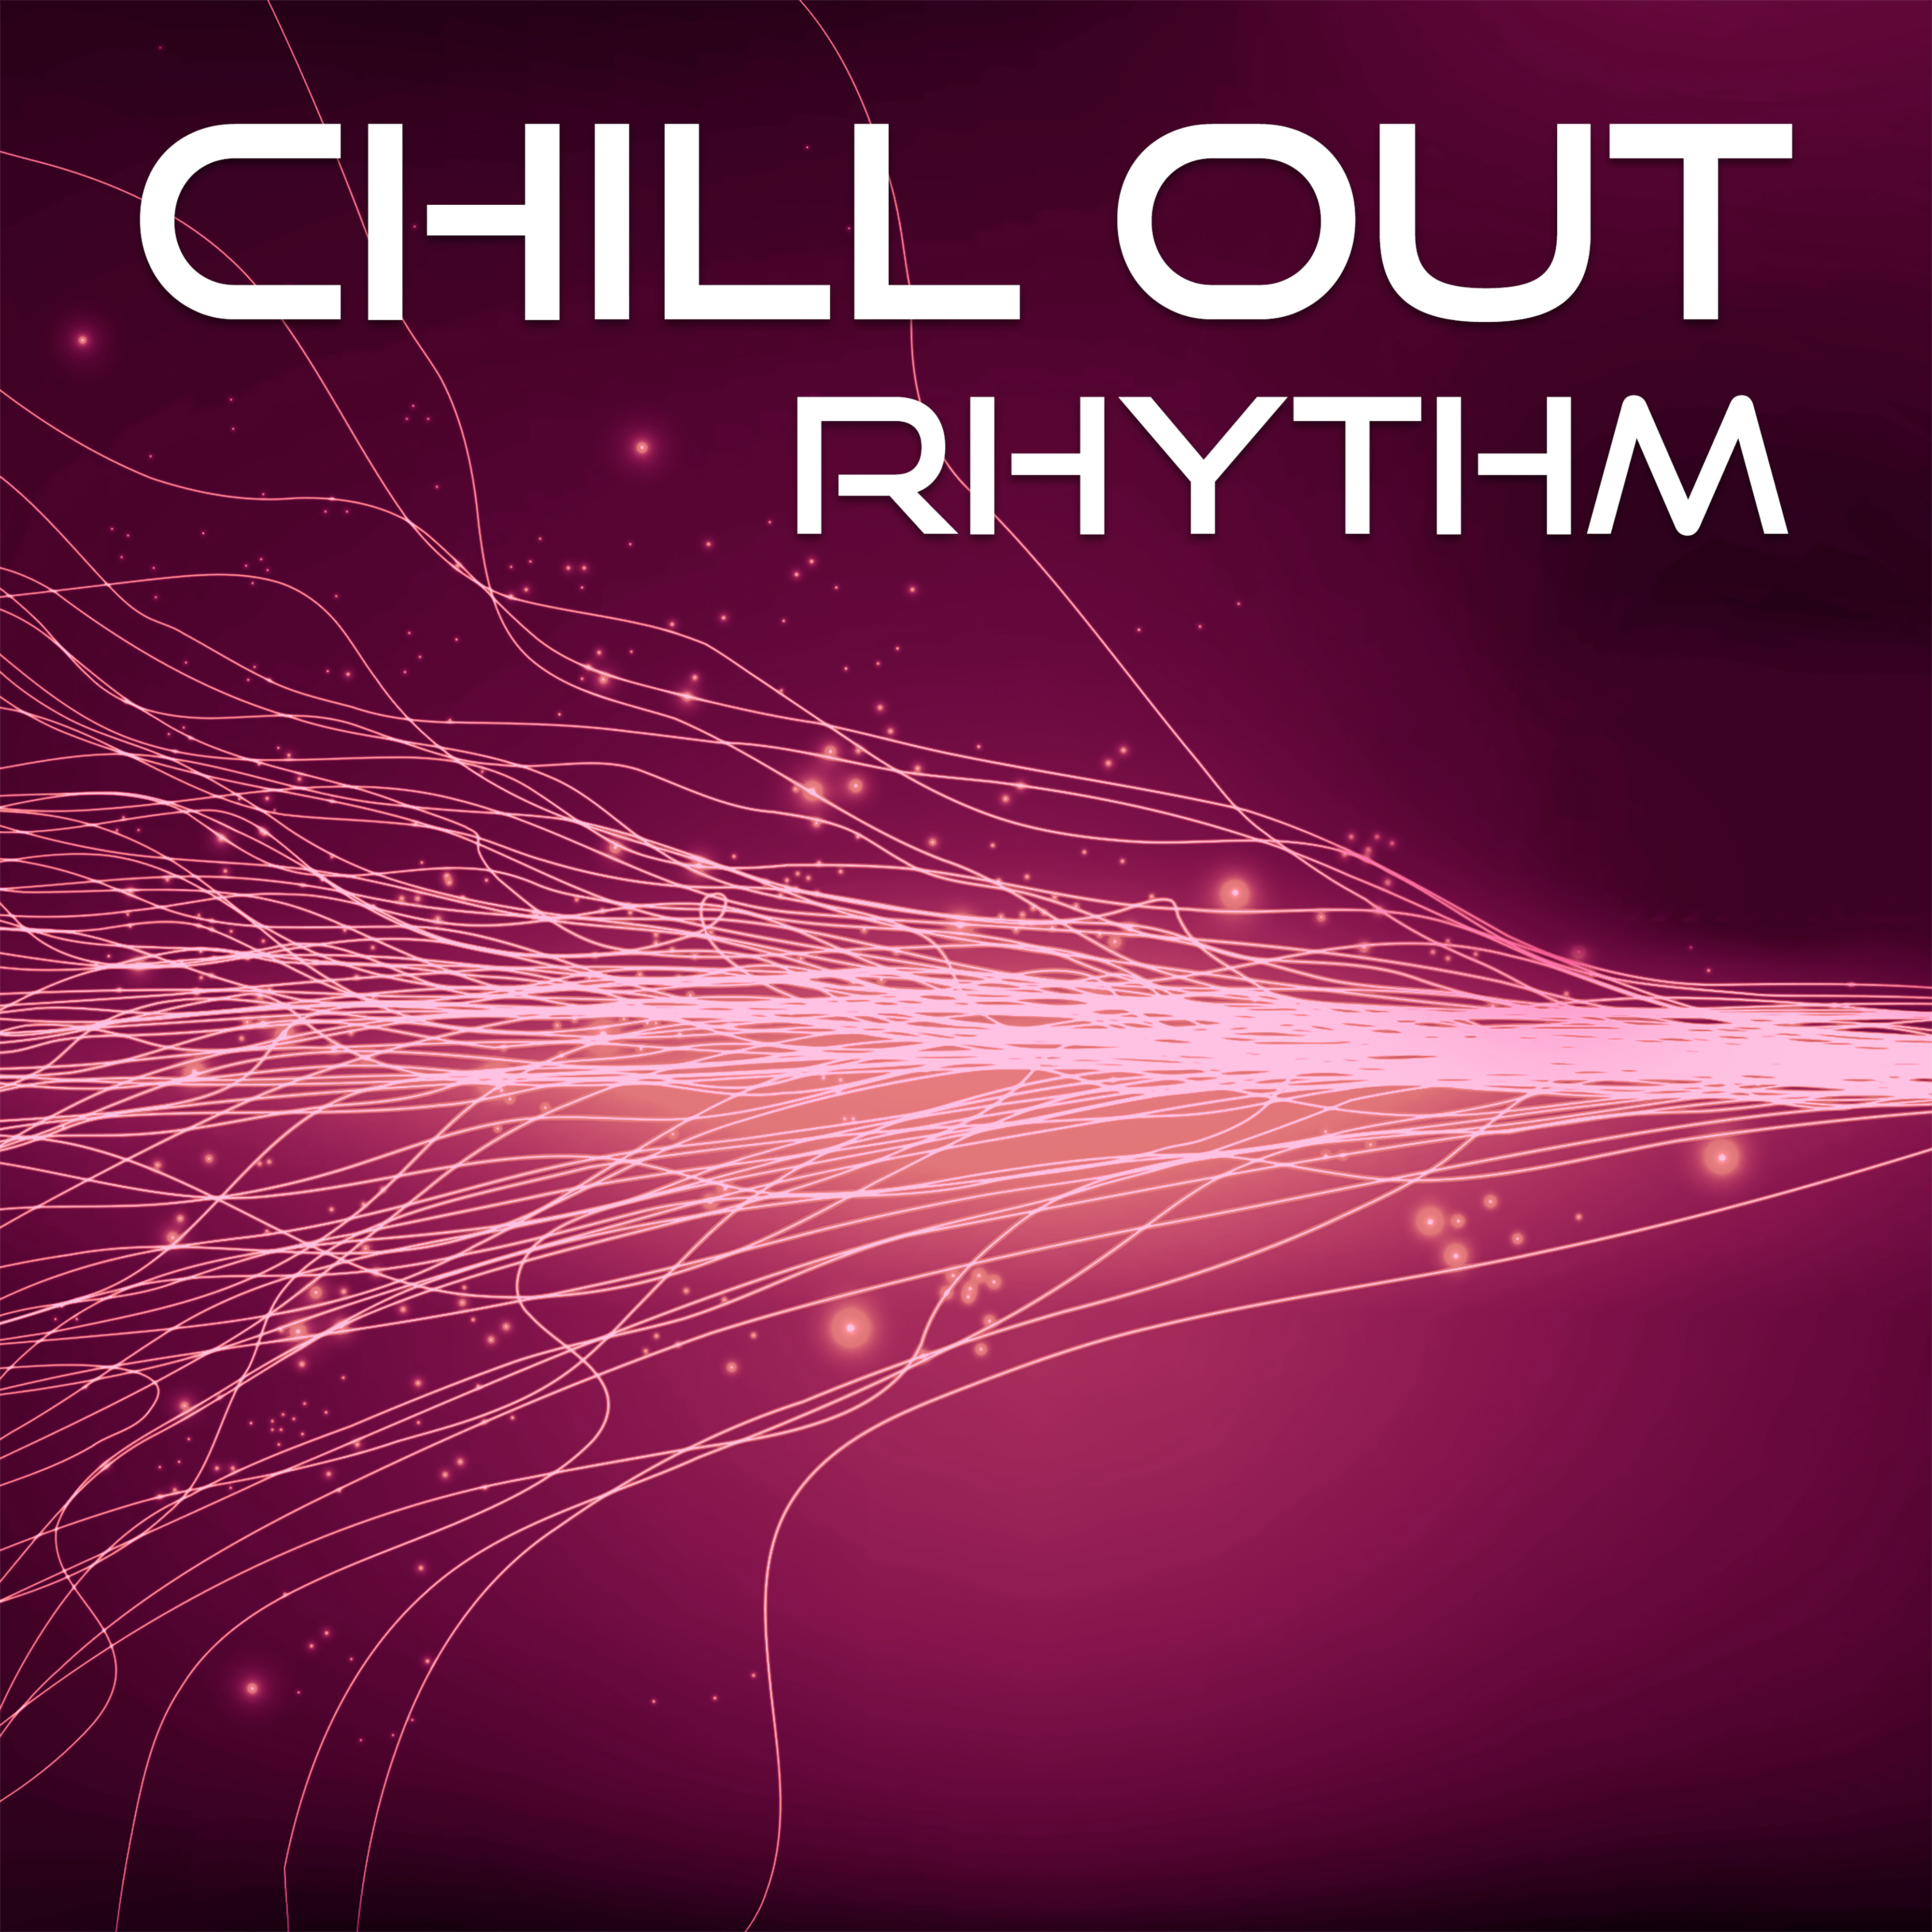 Chill Out Rhythm  Calming Chill Out Music, Sounds to Relax, Summer Sun, Sensual Vibes